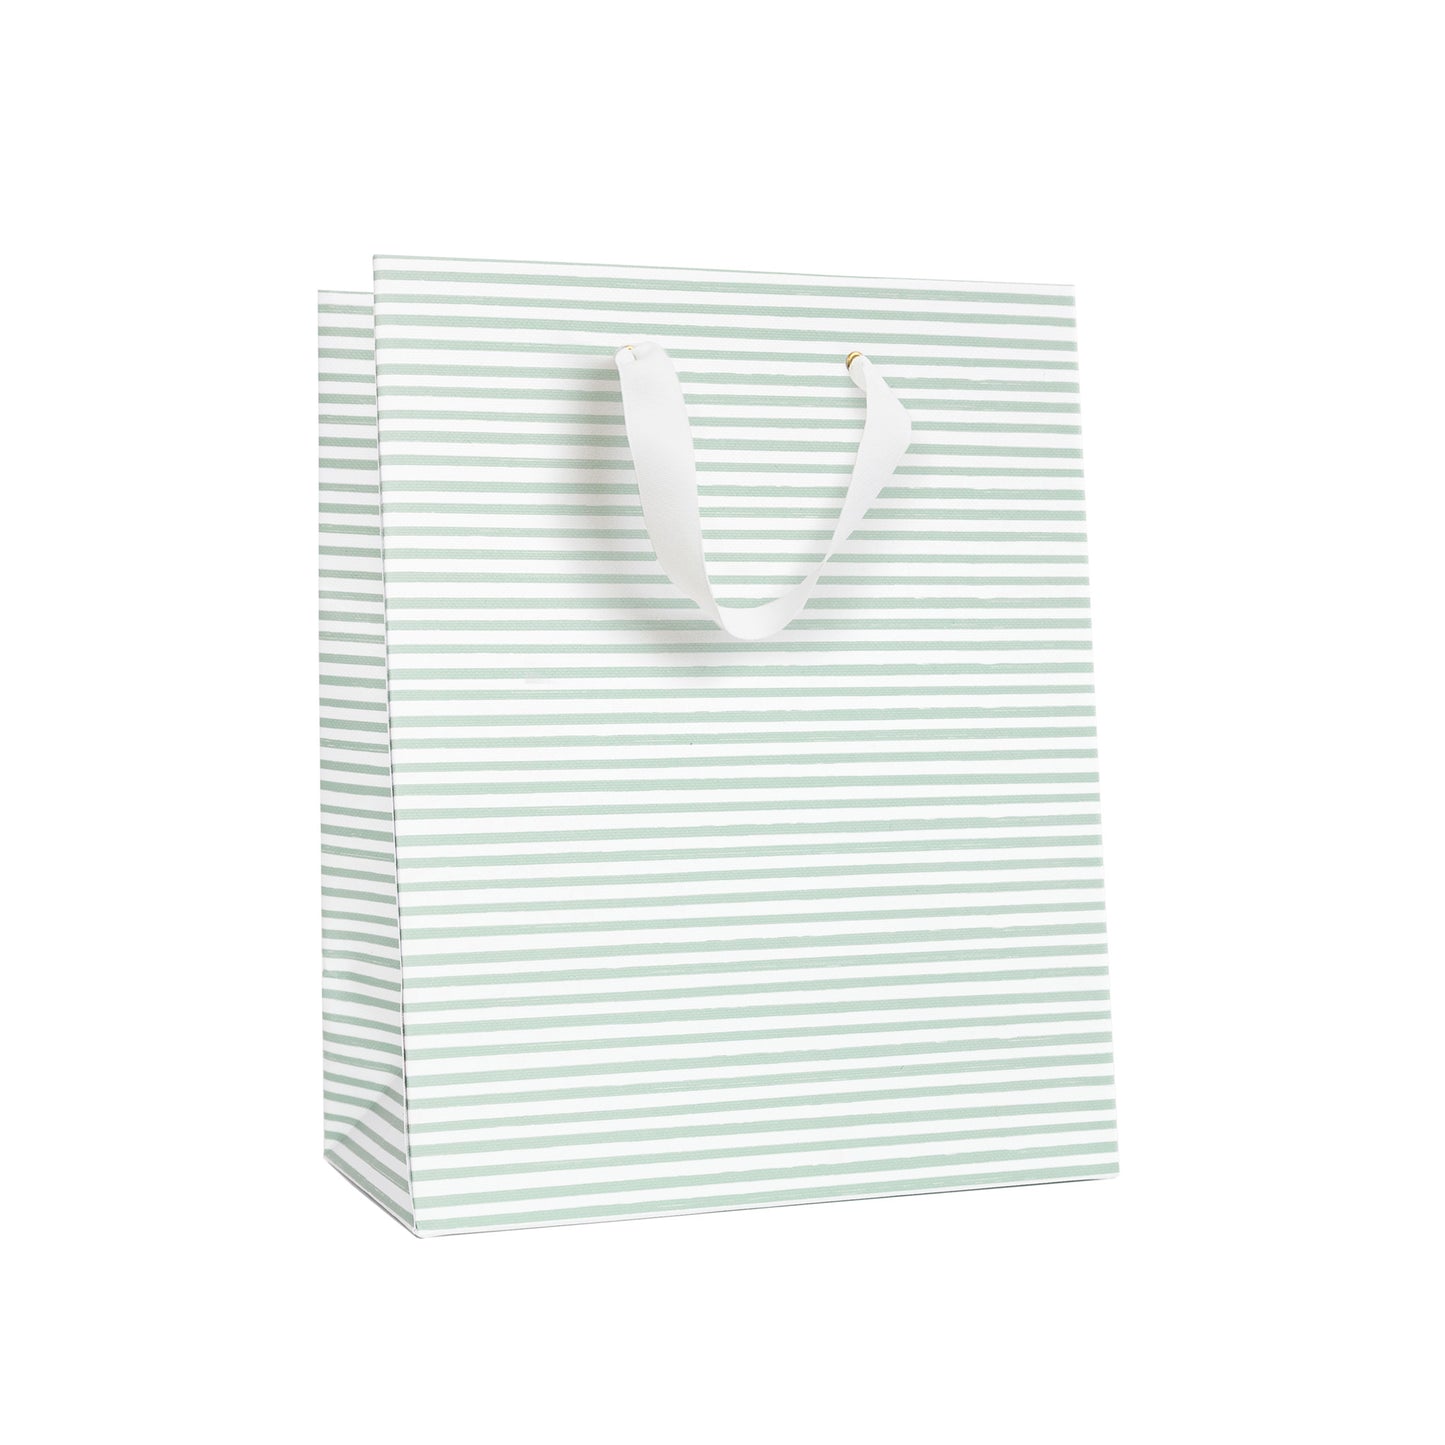 Mint Green and White Painted Stripe Gift Bag